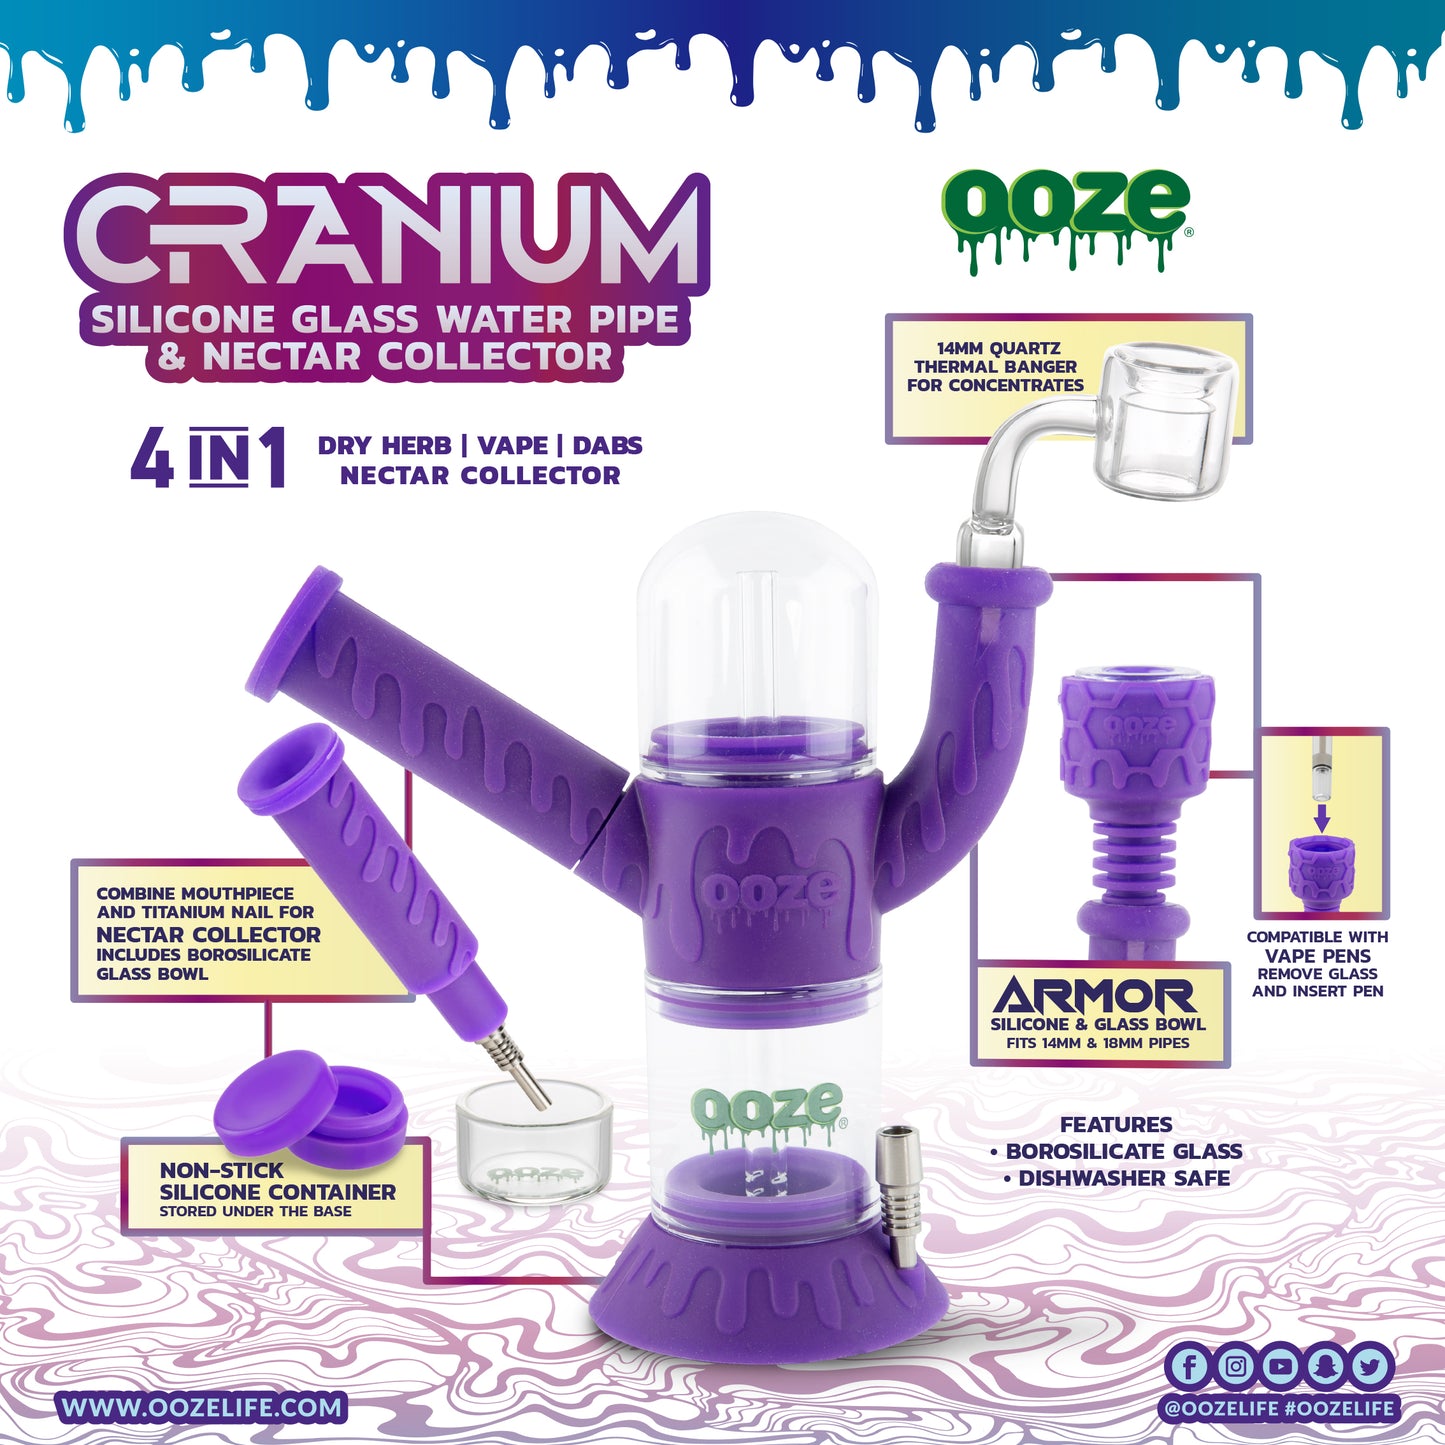 Sillicon/Glass Hybrid Nectar Collector + Dab Tools [Waxmaid] - Mr. Purple -  Glass Water Pipes, Bongs, RAW Cones/Papers, And Much More